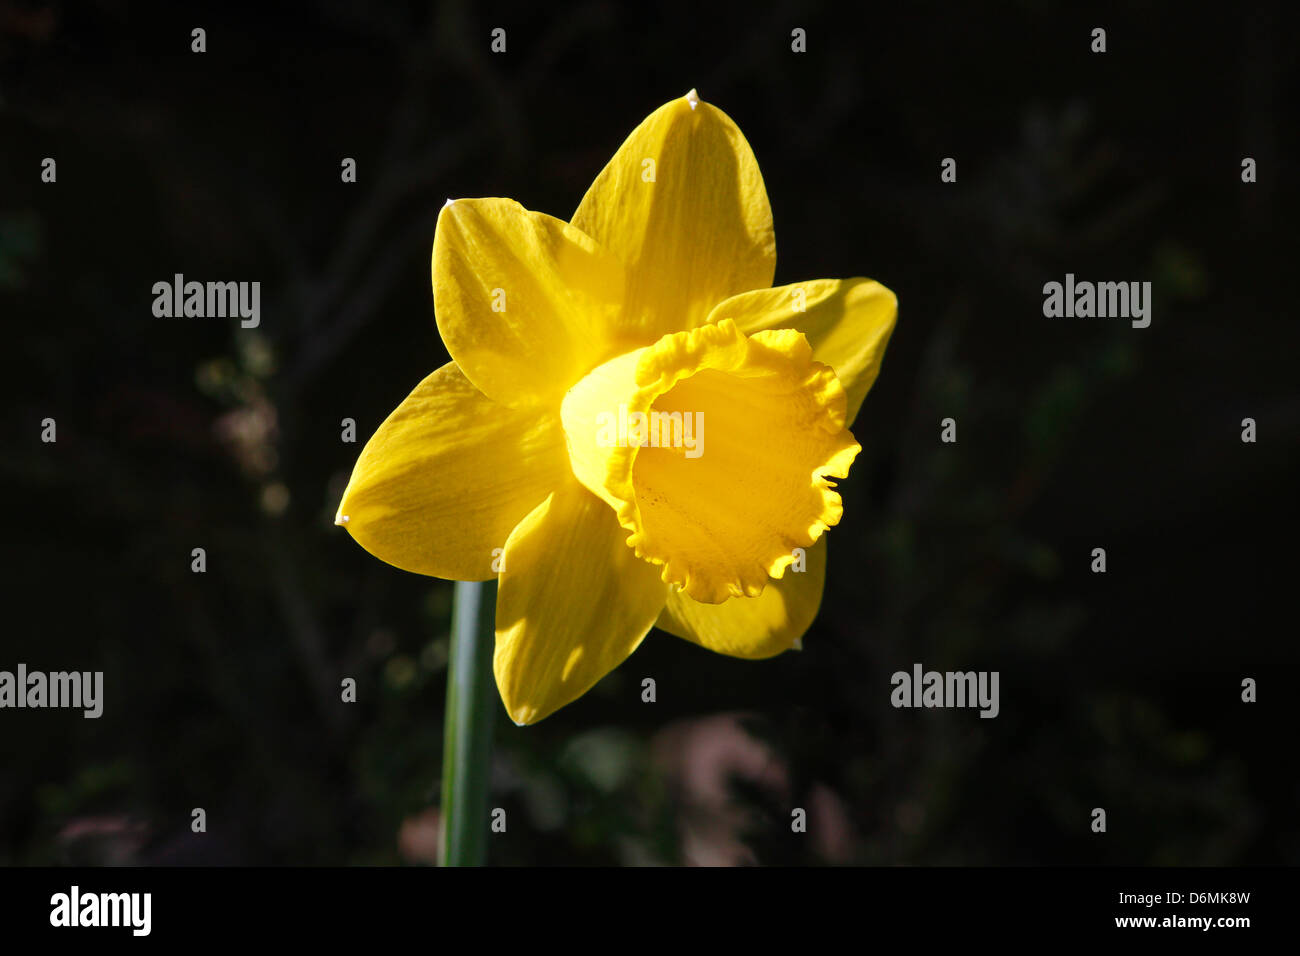 Head of yellow Daffodil (narcissus) Stock Photo